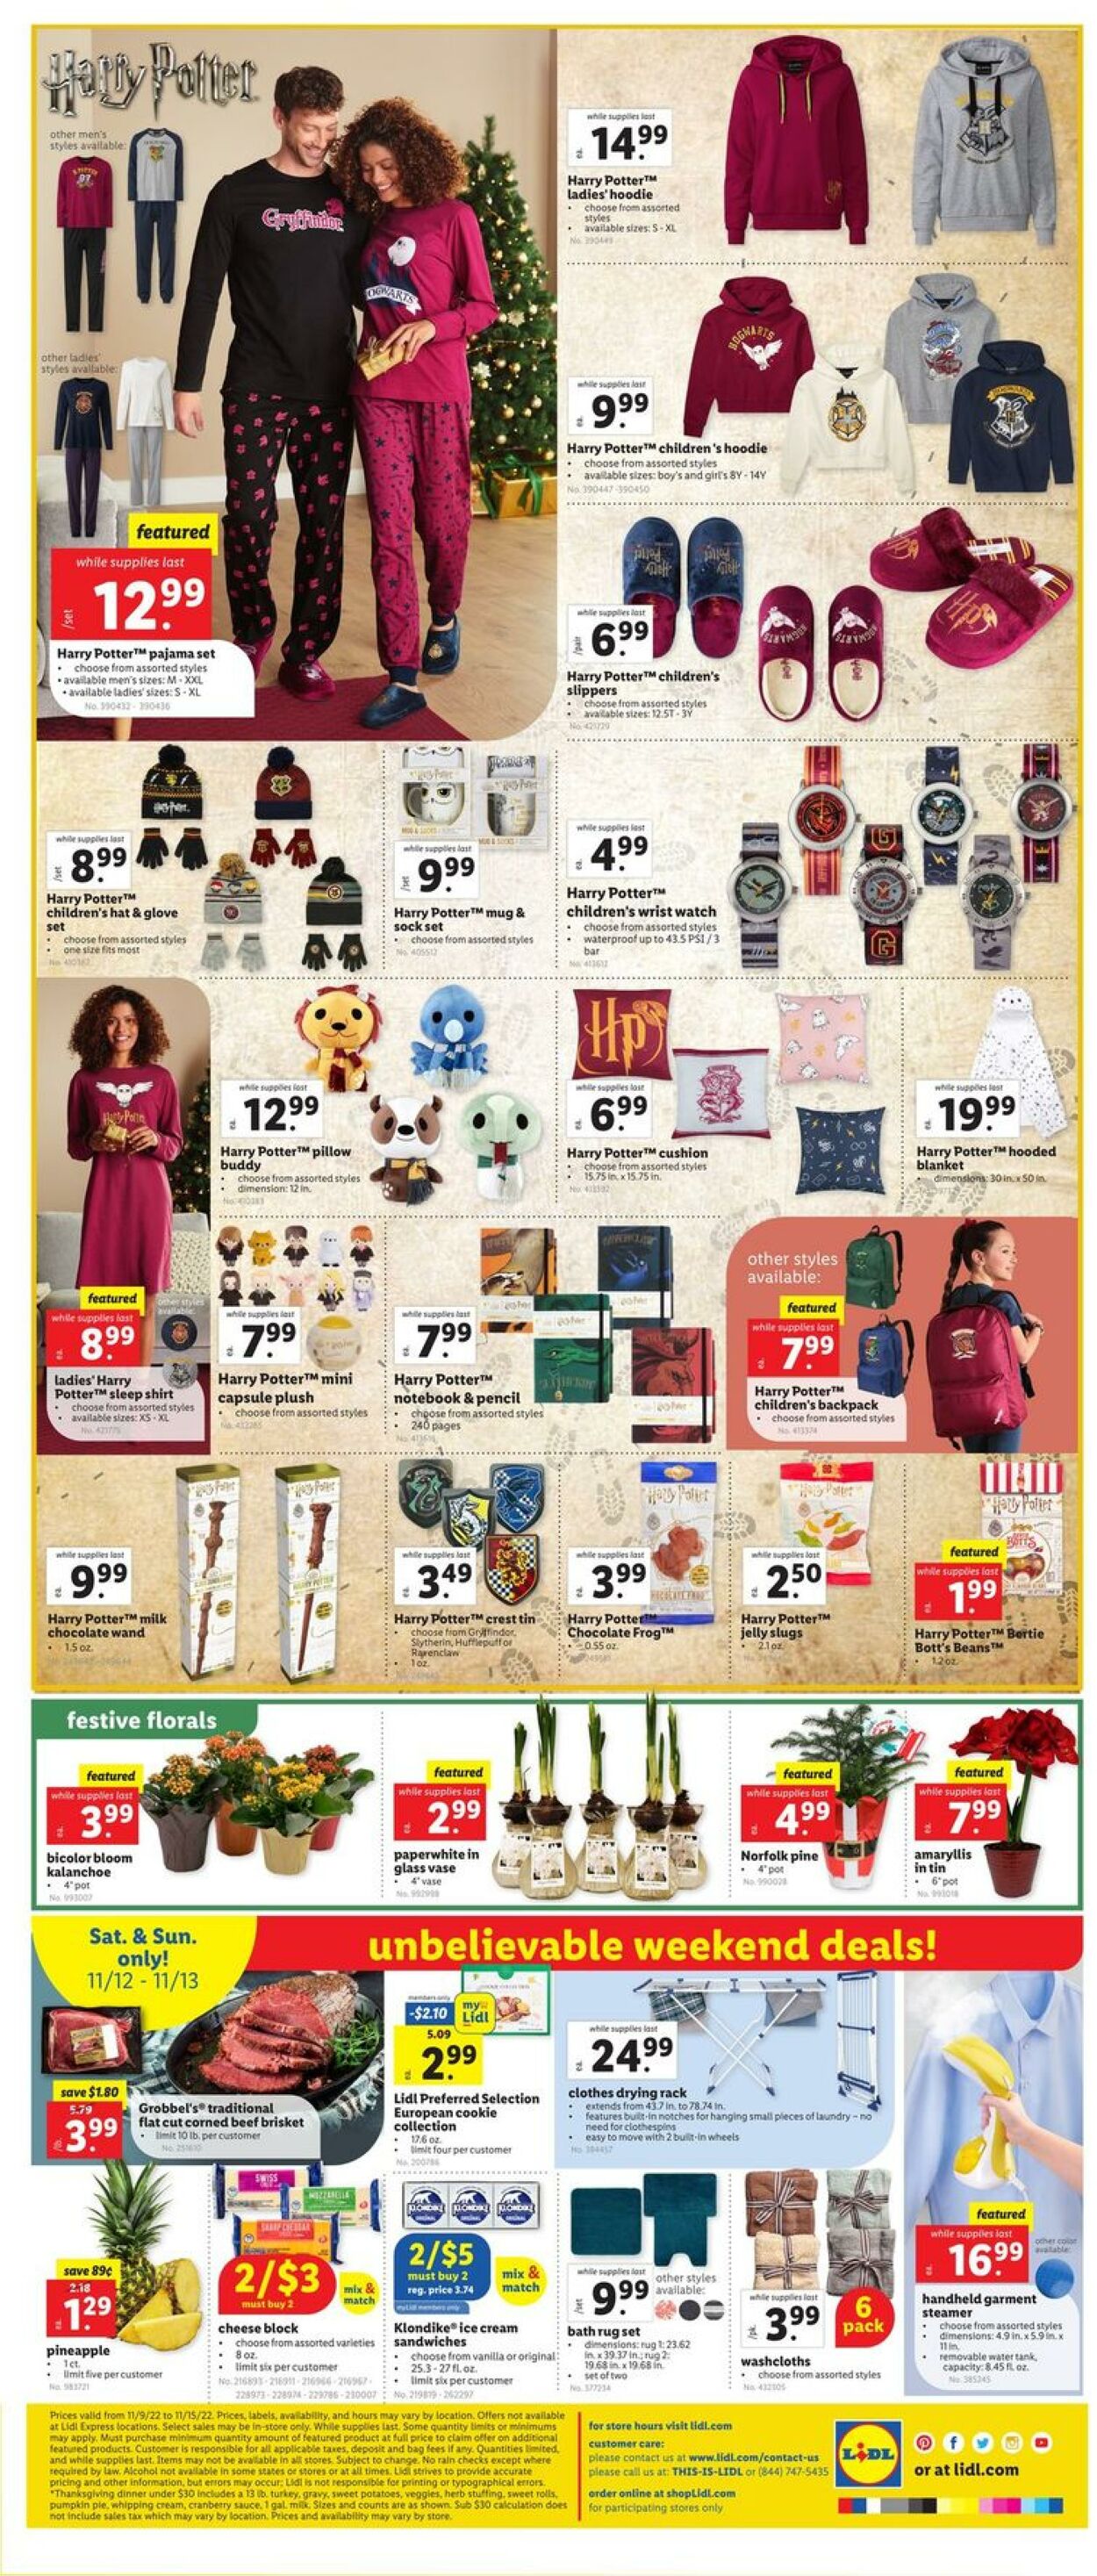 Weekly ad Lidl 11/09/2022 - 11/15/2022